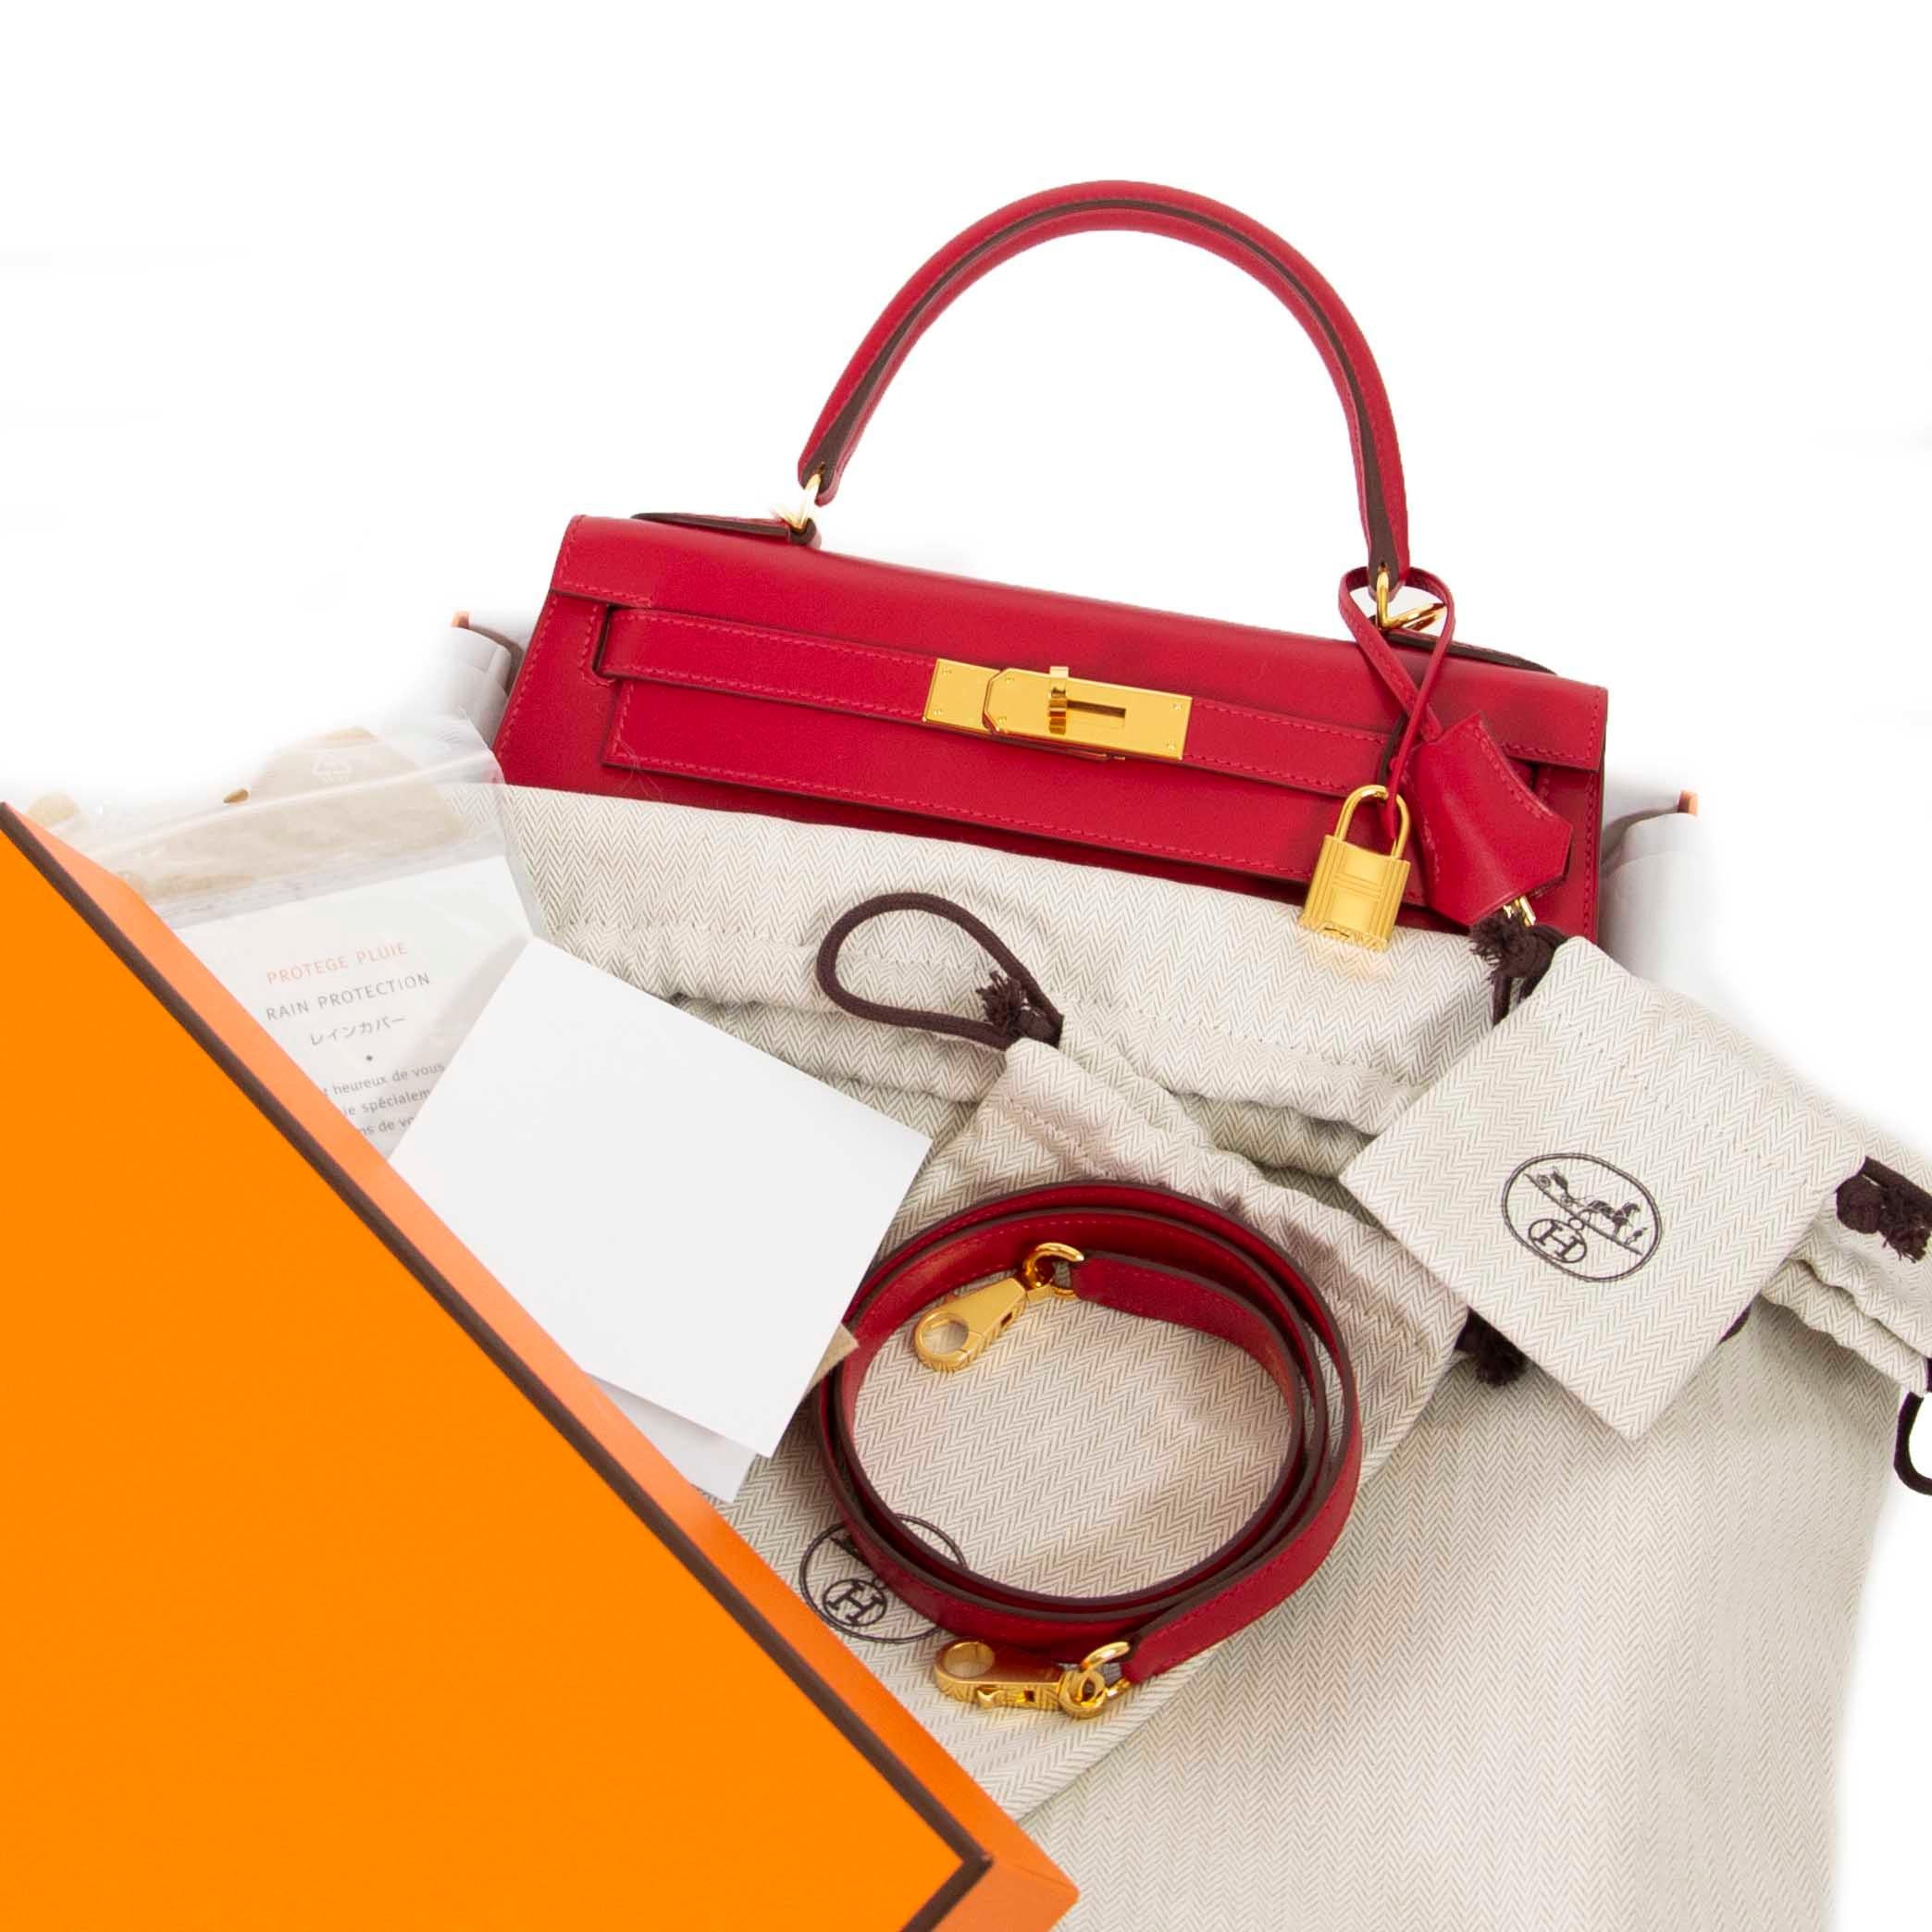 Showstopper alert! This beautiful Hermès Kelly bag is beyond gorgeous: its red color is energetic yet elegant, the Veau Tadelakt is one of Hermès most popular leathers. It's known for its smooth and glossy finish. The gold toned hardware only adds